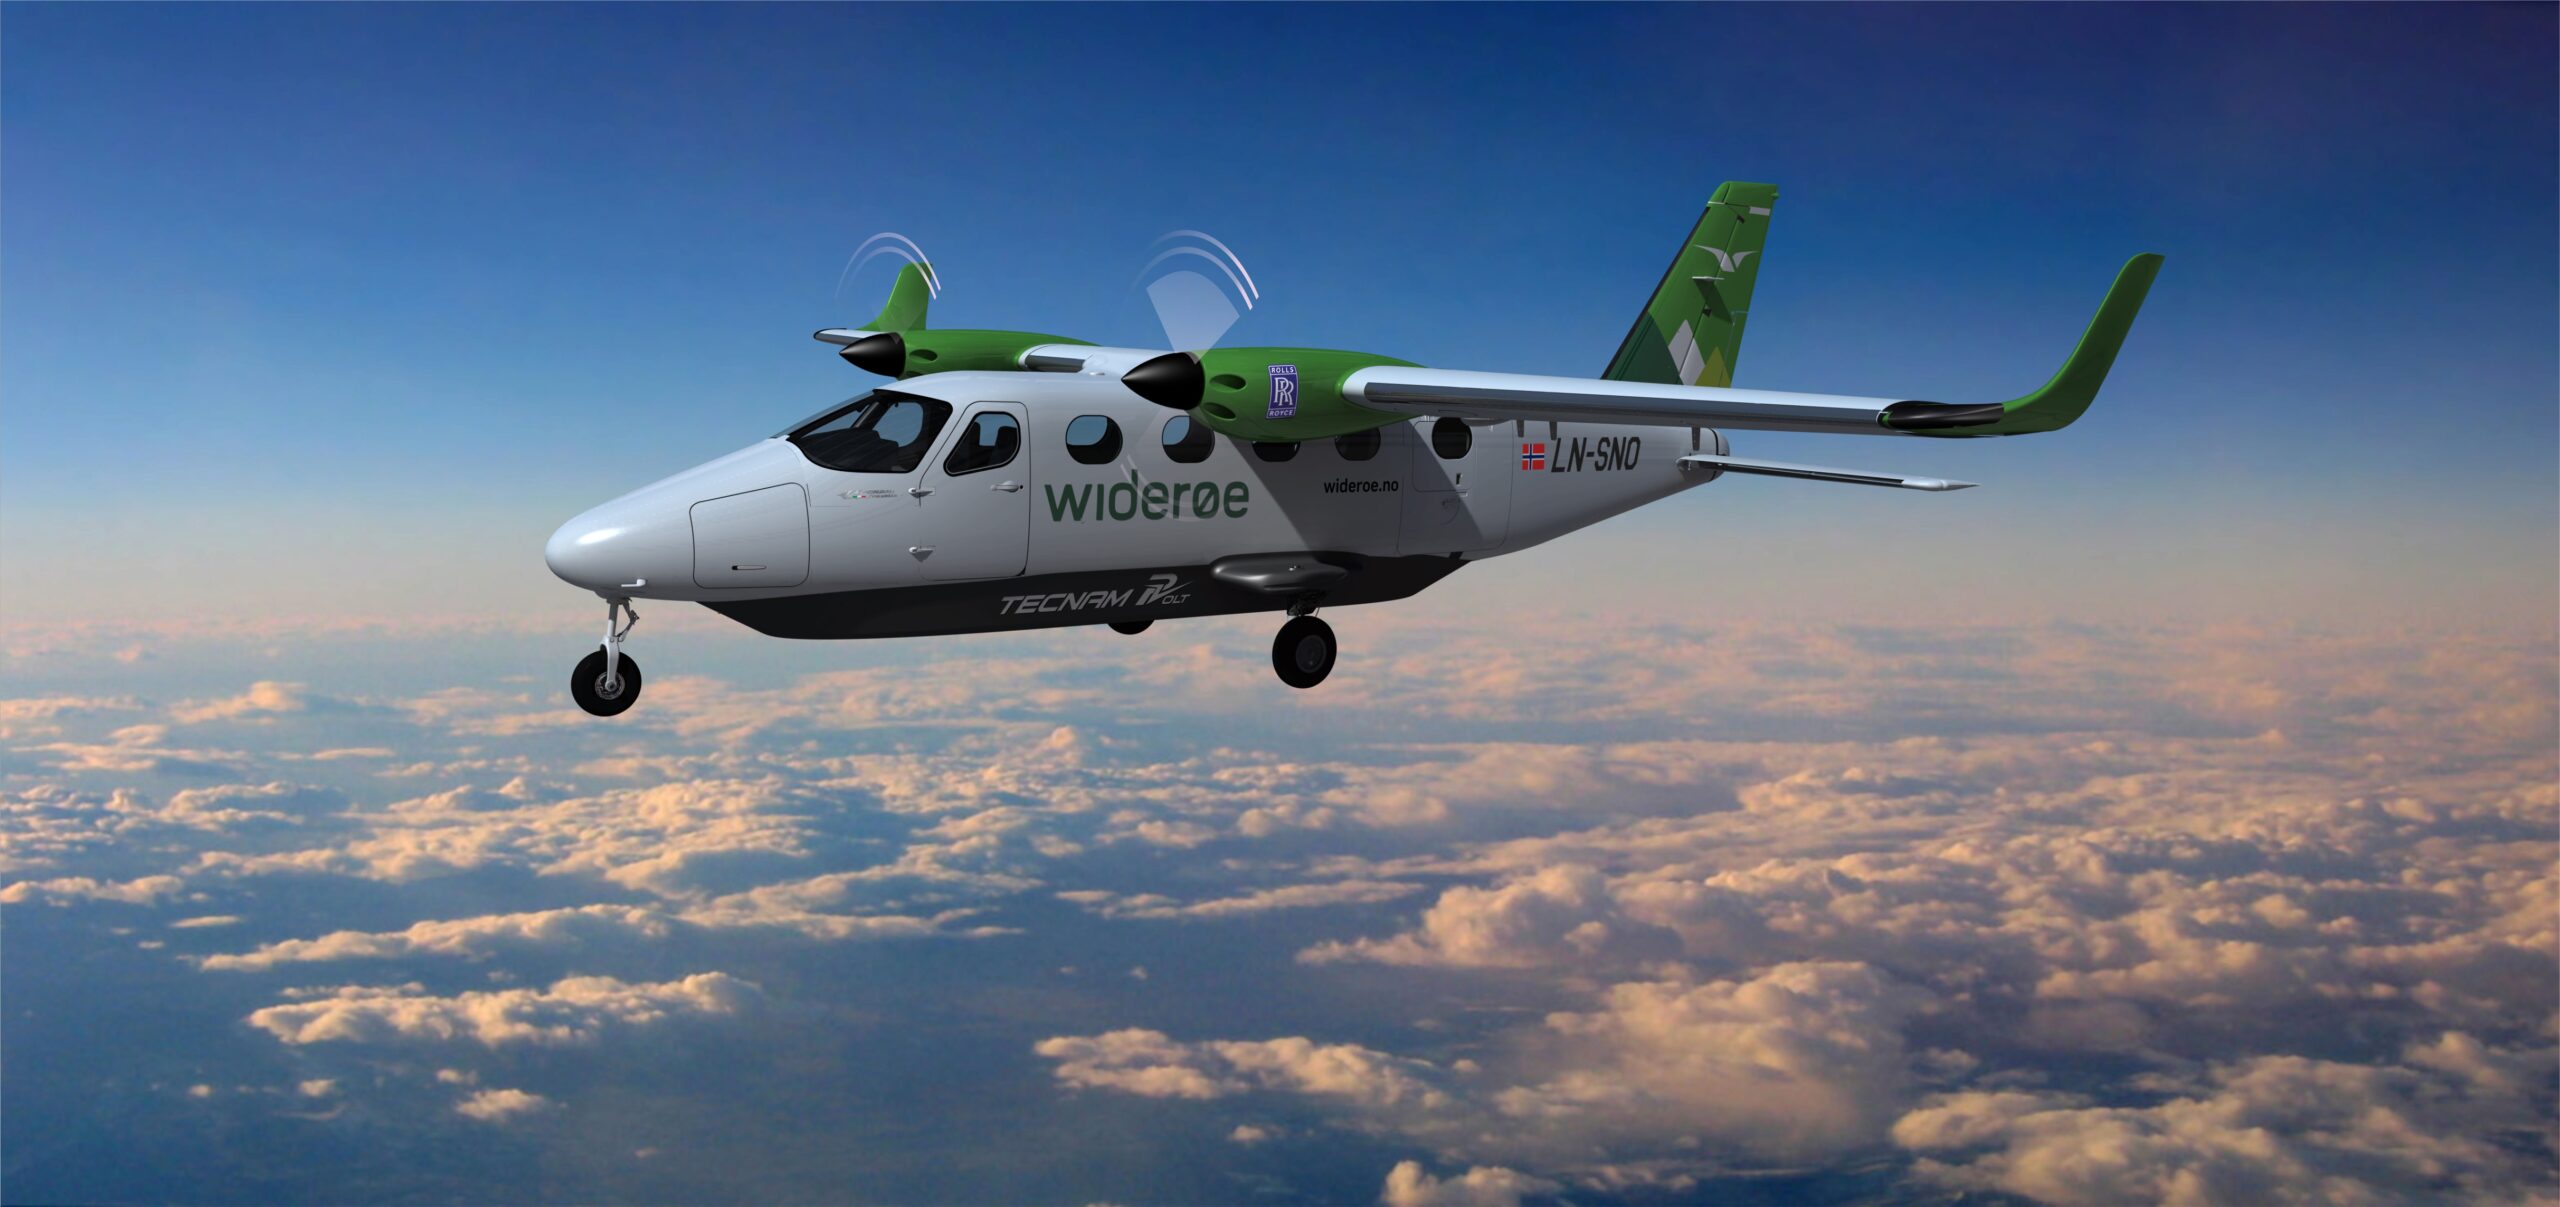 Start Norge aims to launch the first commercial emission-free flight between Stavanger-Bergen in 2026. Photo: Widerøe.